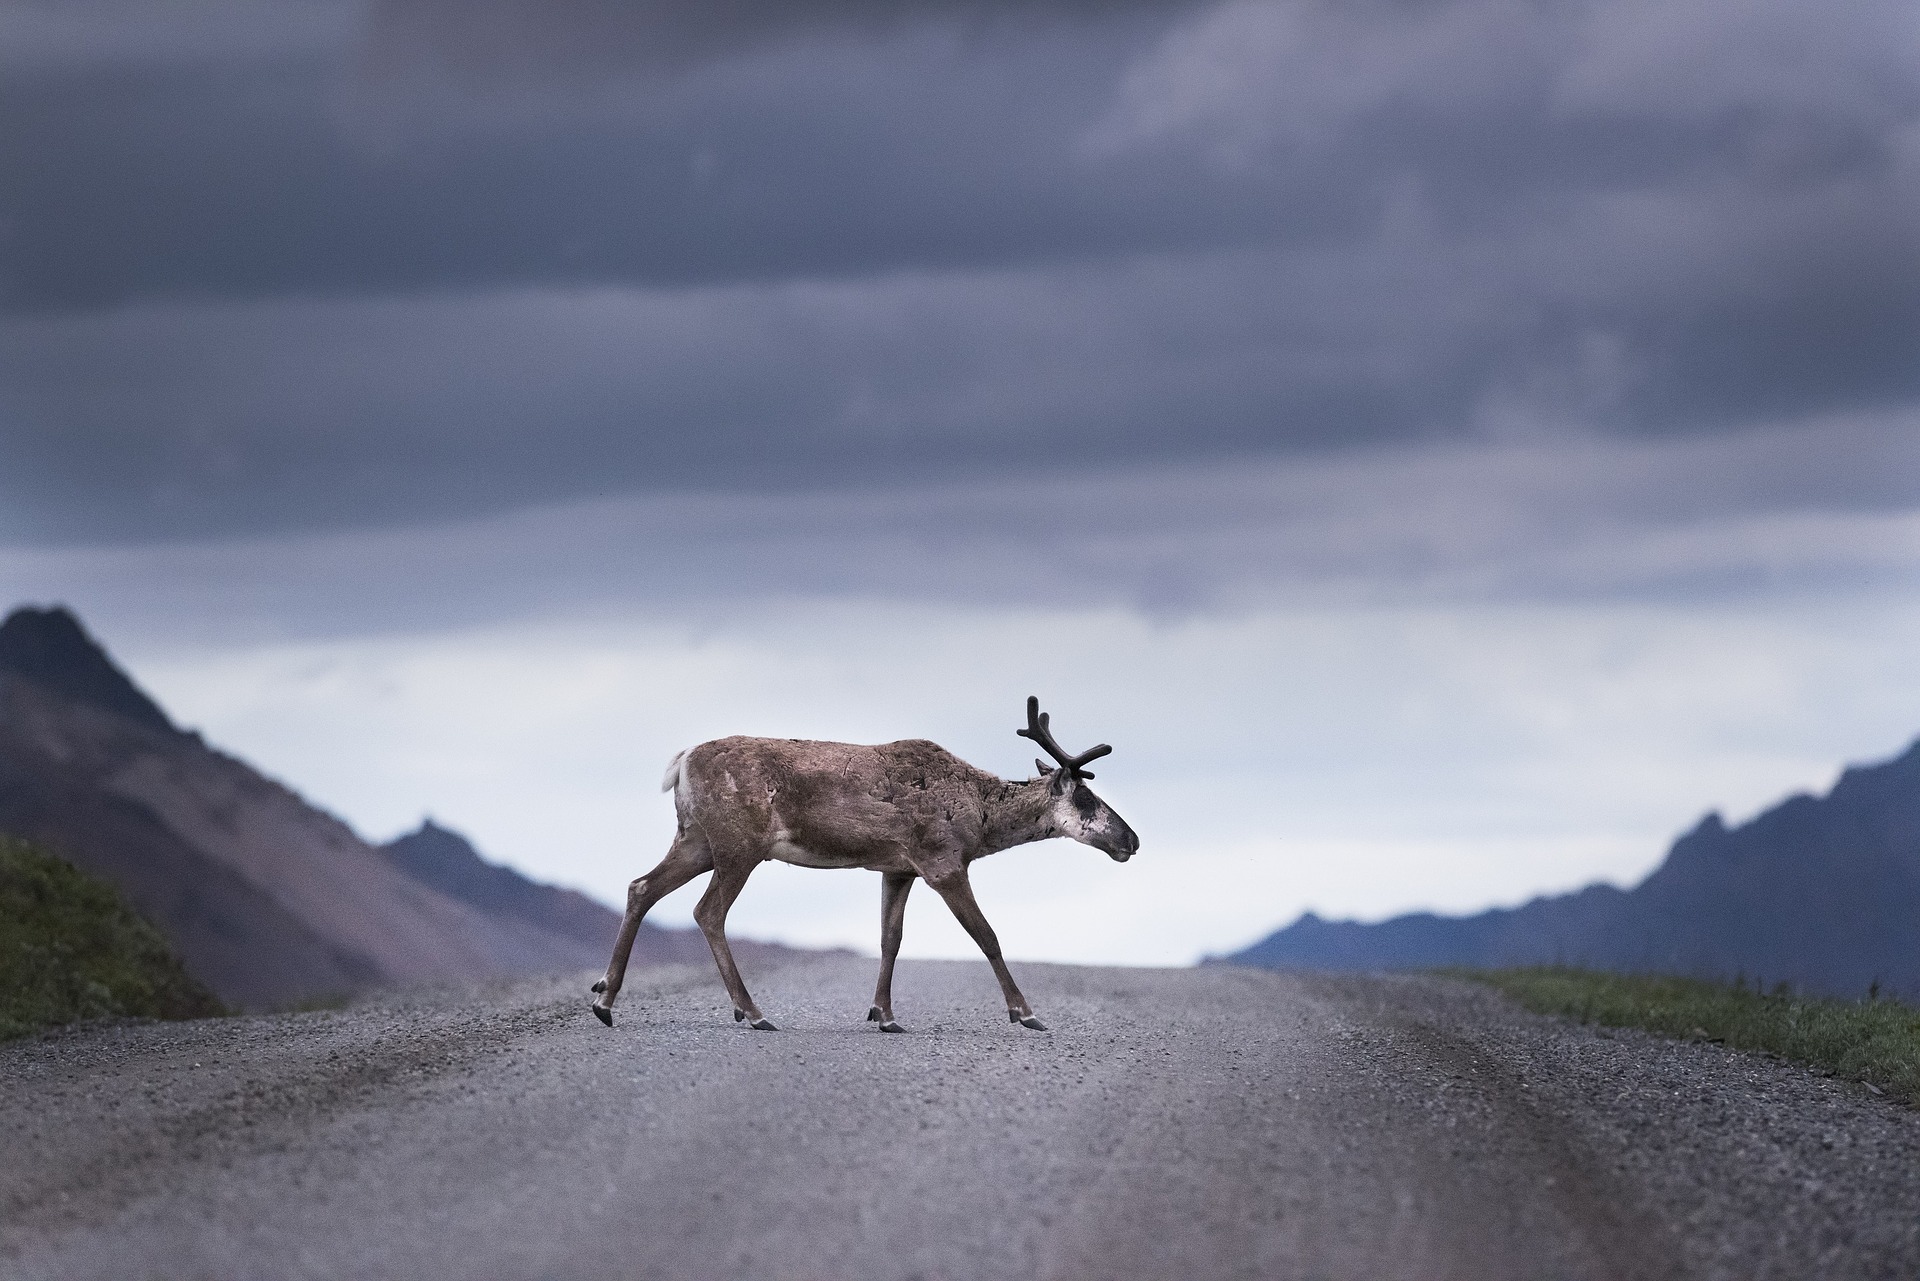 Photo of caribou crossing the road with mountains in the background.